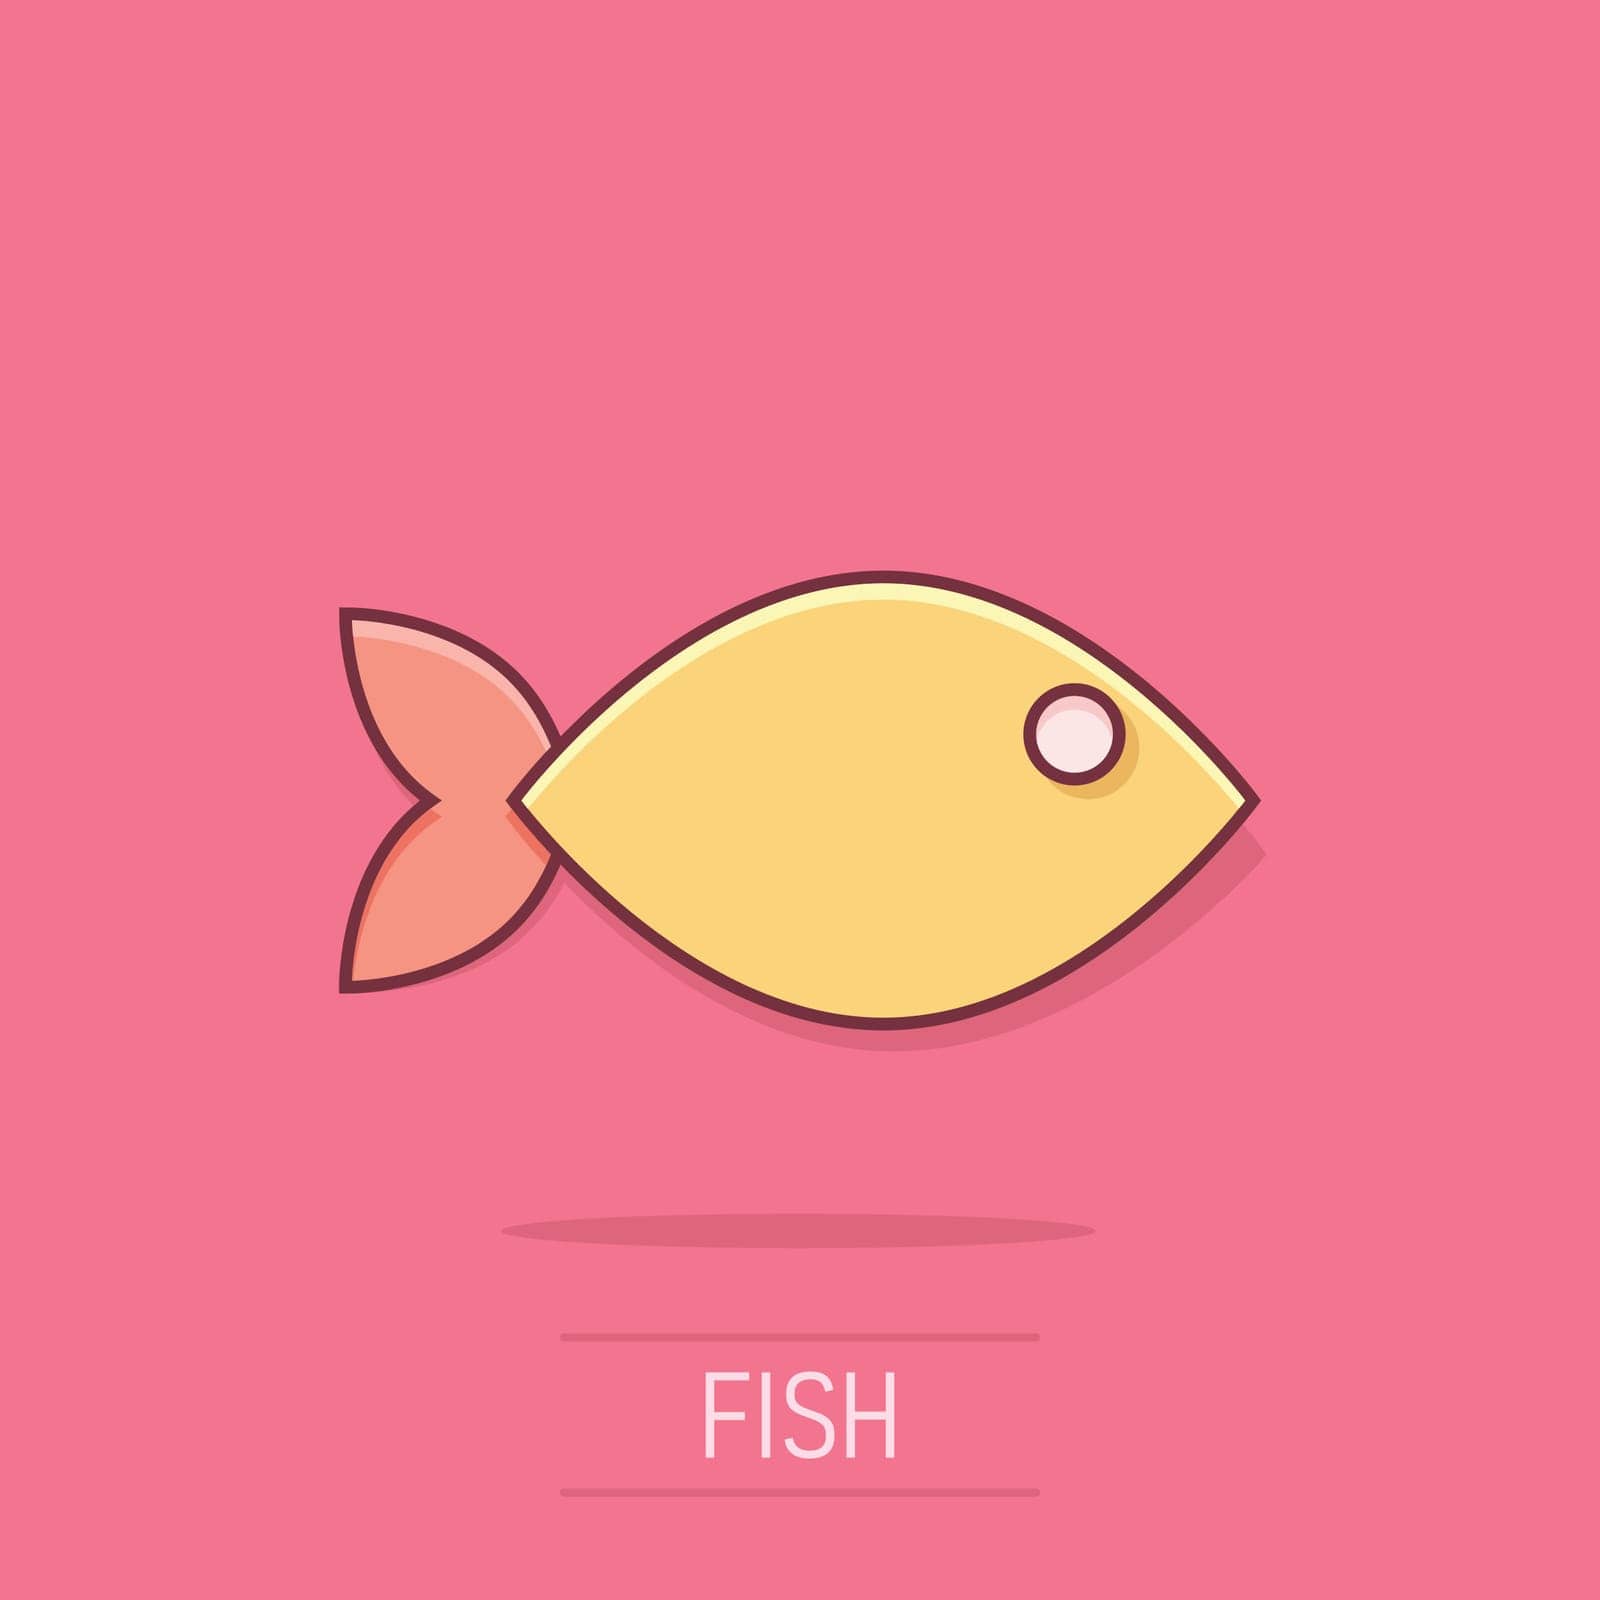 Fish sign icon in comic style. Goldfish vector cartoon illustration on isolated background. Seafood business concept splash effect.